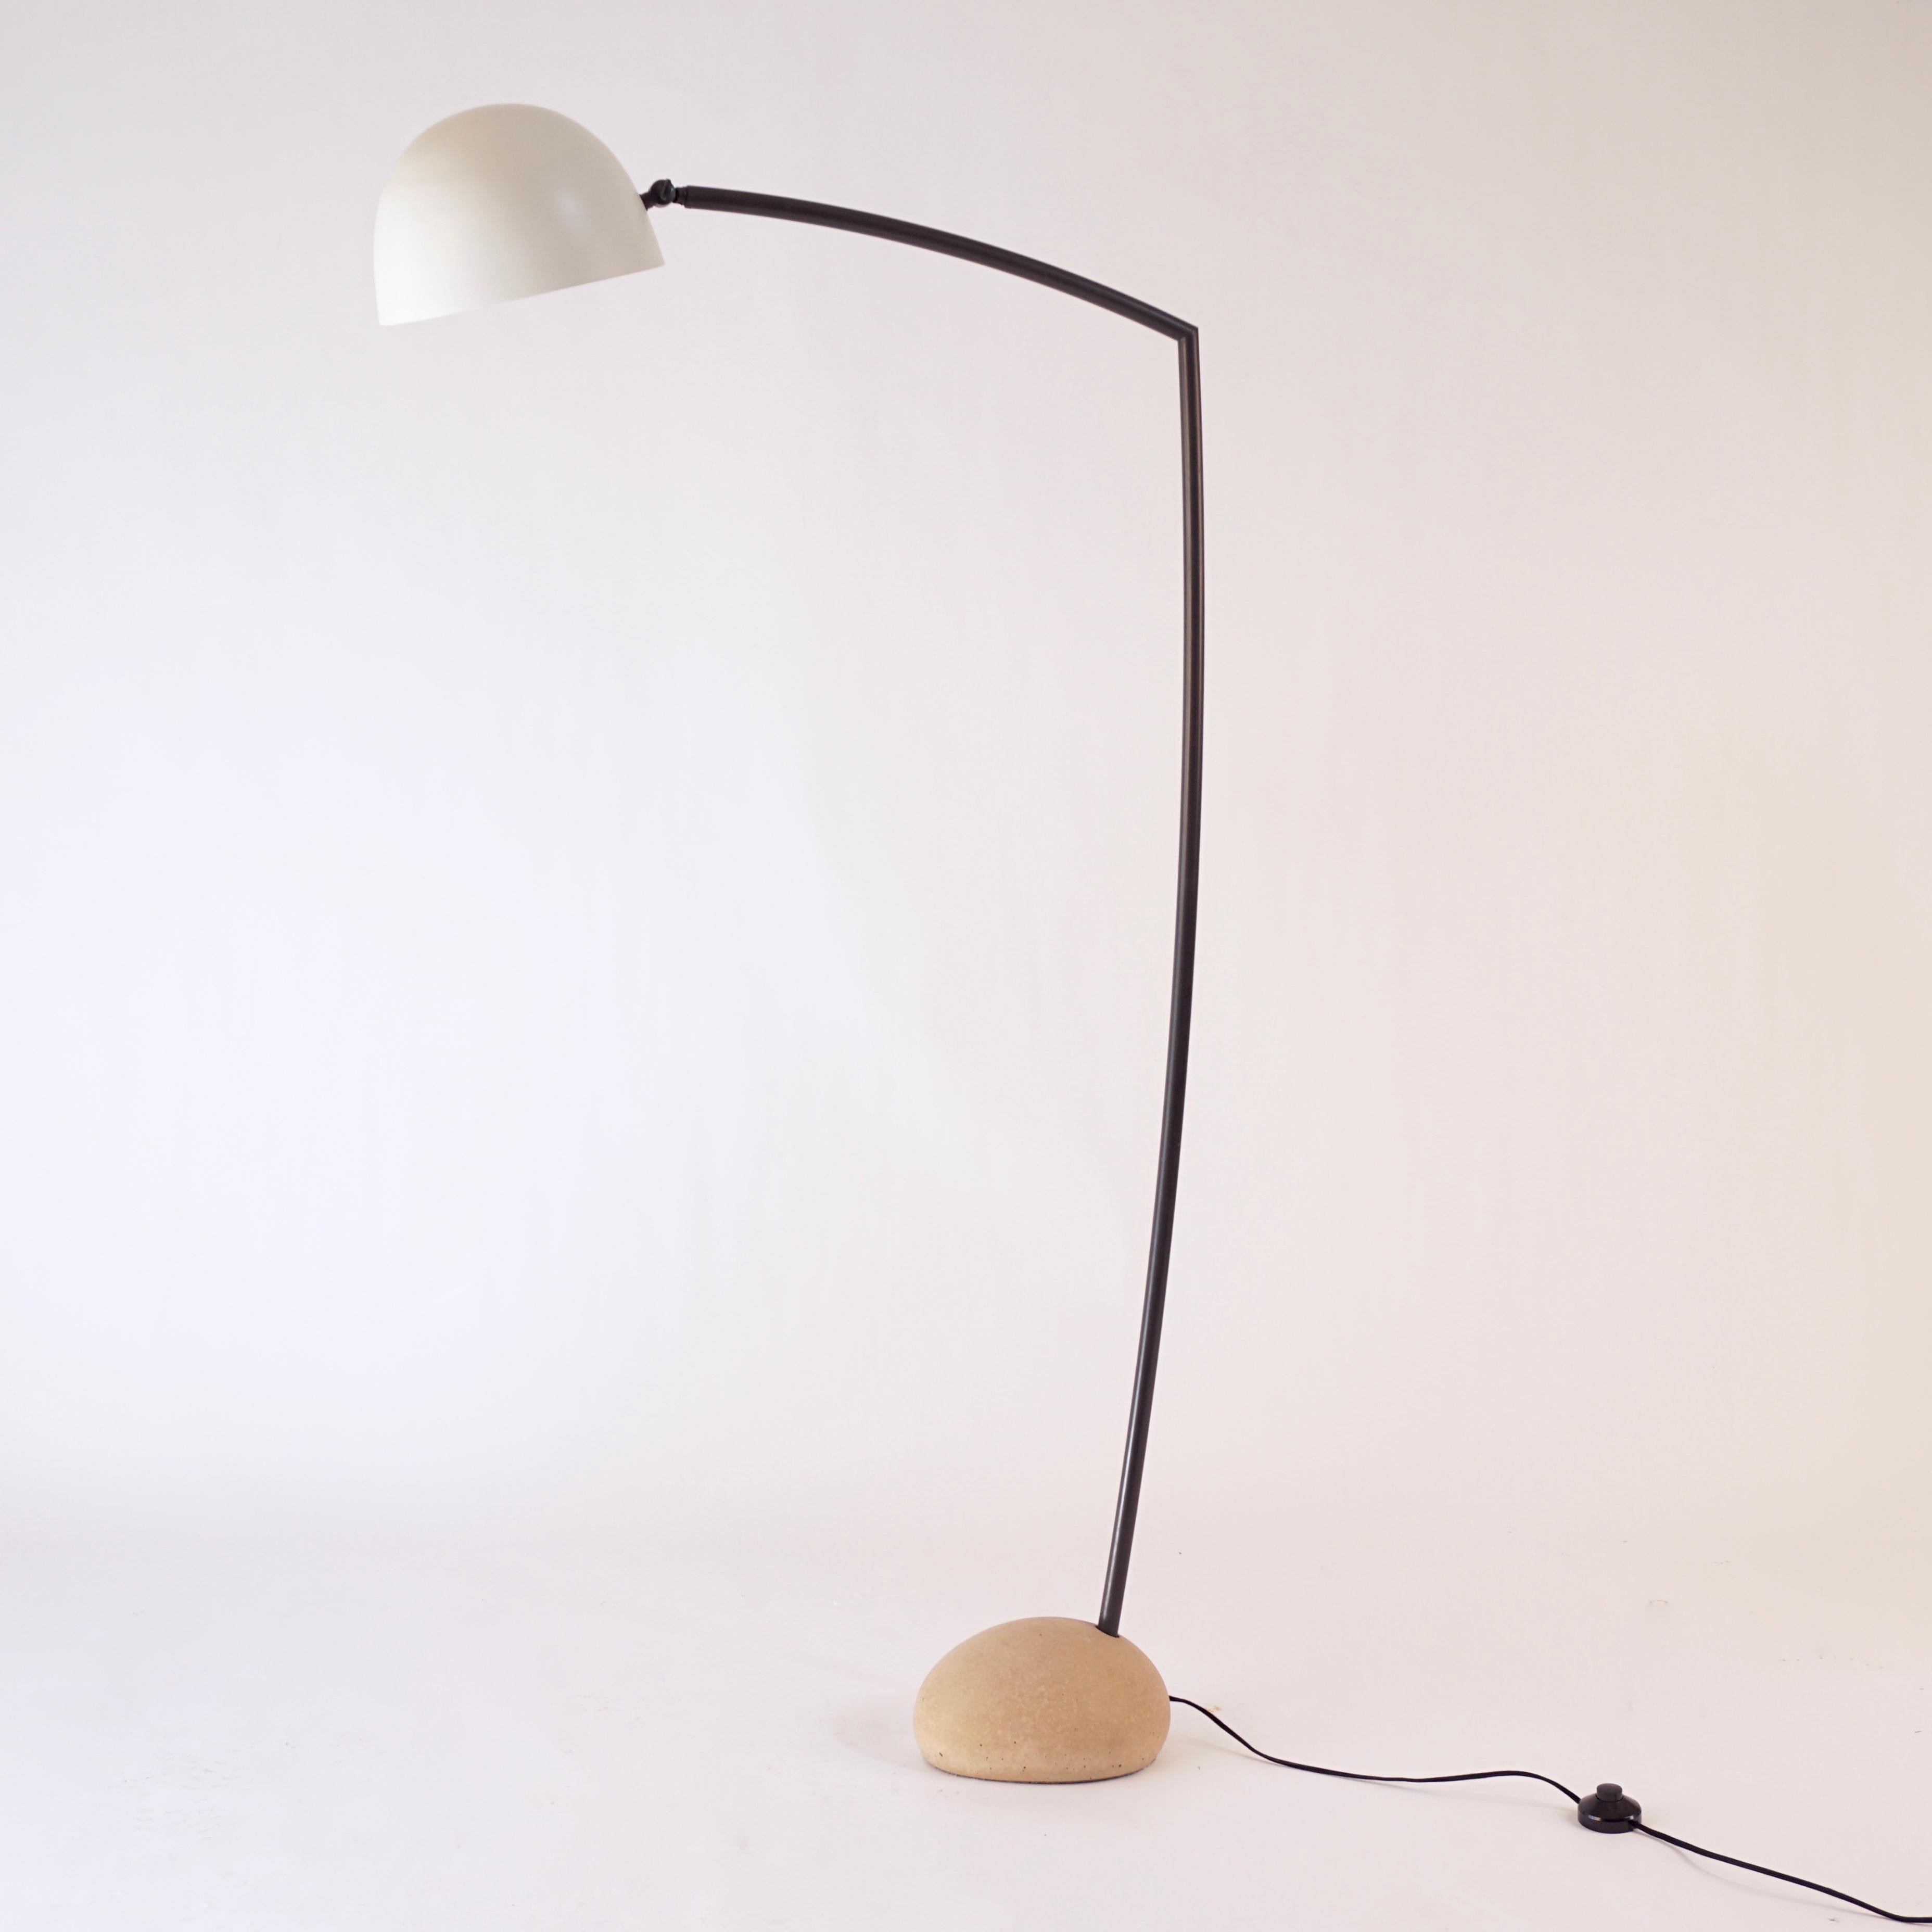 This is the large version of the sky floor lamp. The light colored cement base was made with forms taken from actual stones from the Isle of Skye. The arm is solid bronze with an acid darkened patina, the shade is a hand spun aluminum shade that has